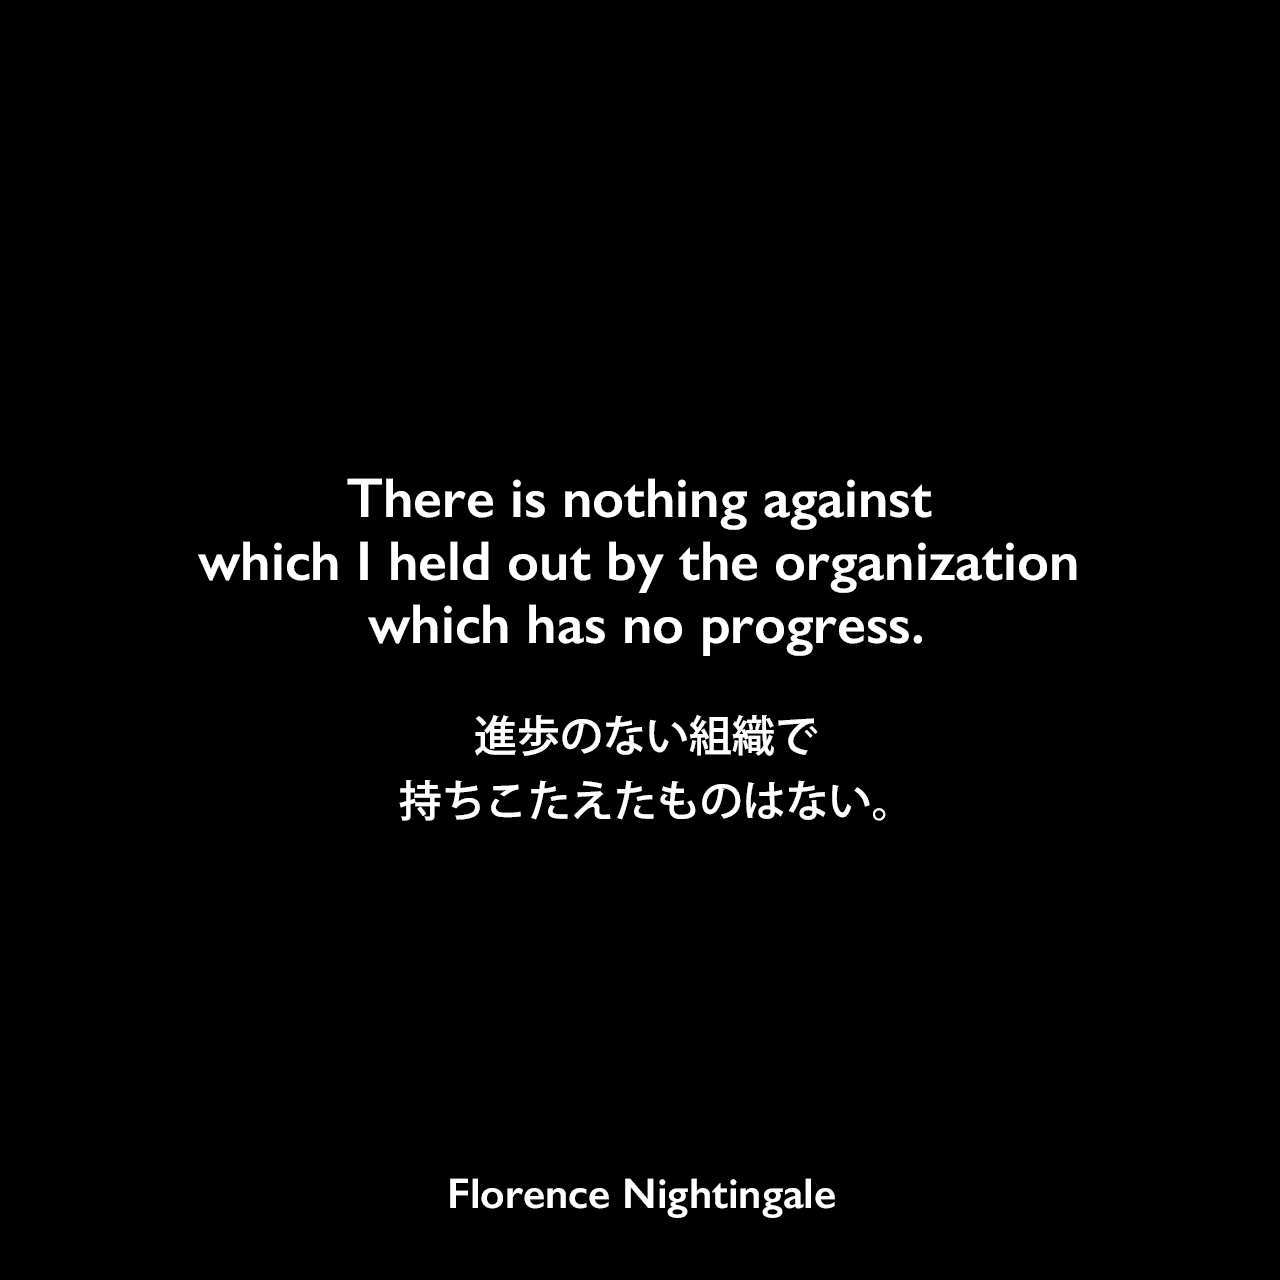 There is nothing against which I held out by the organization which has no progress.進歩のない組織で持ちこたえたものはない。